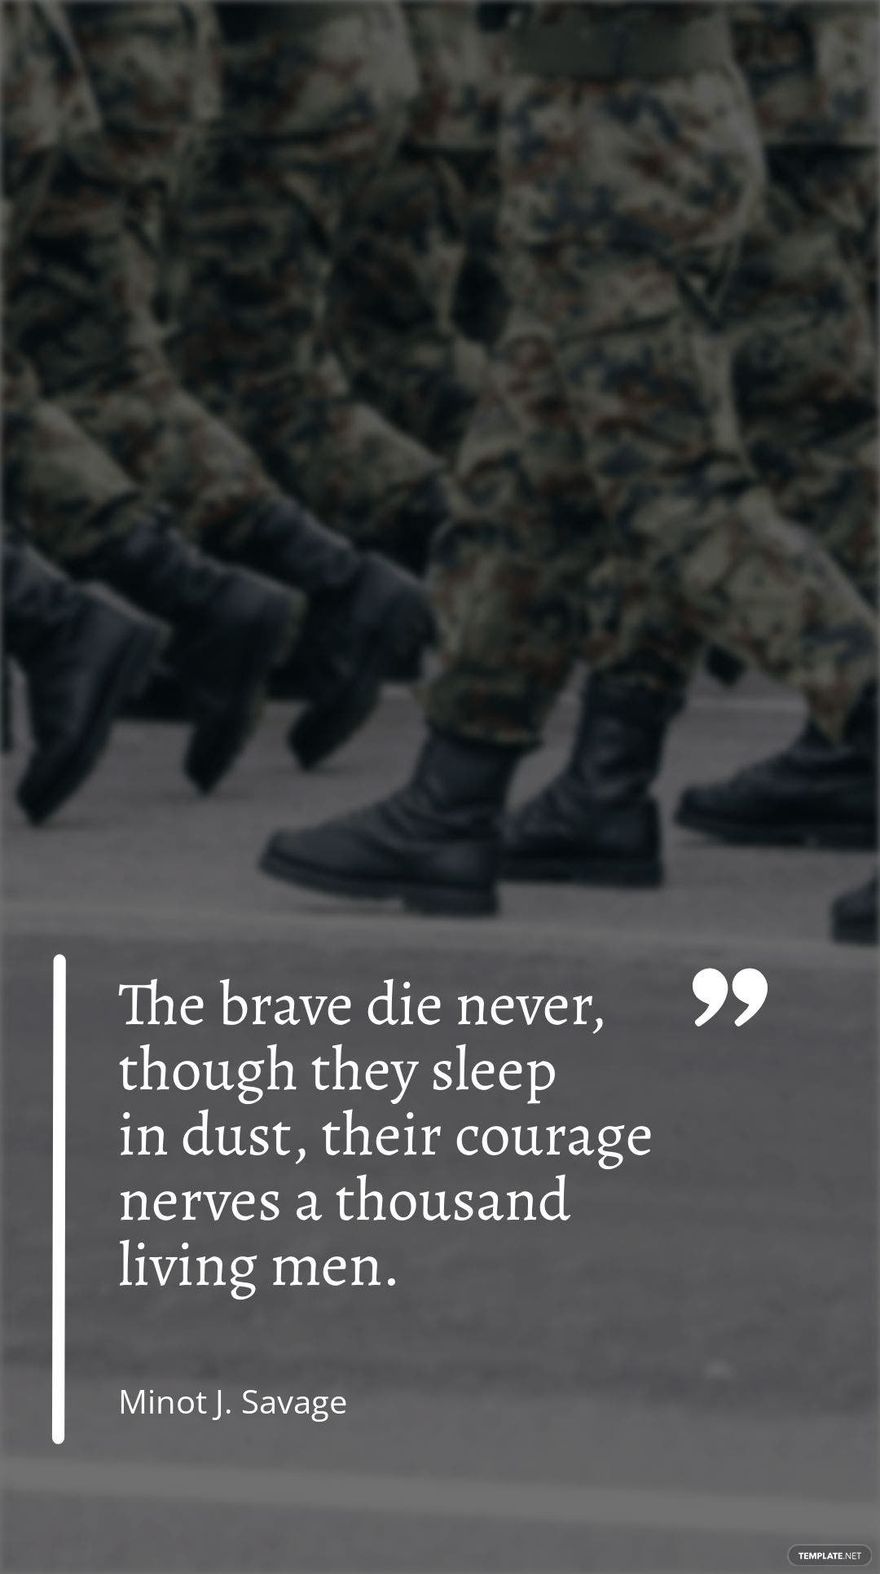 Free Minot J. Savage - ”The brave die never, though they sleep in dust, their courage nerves a thousand living men.” in JPG